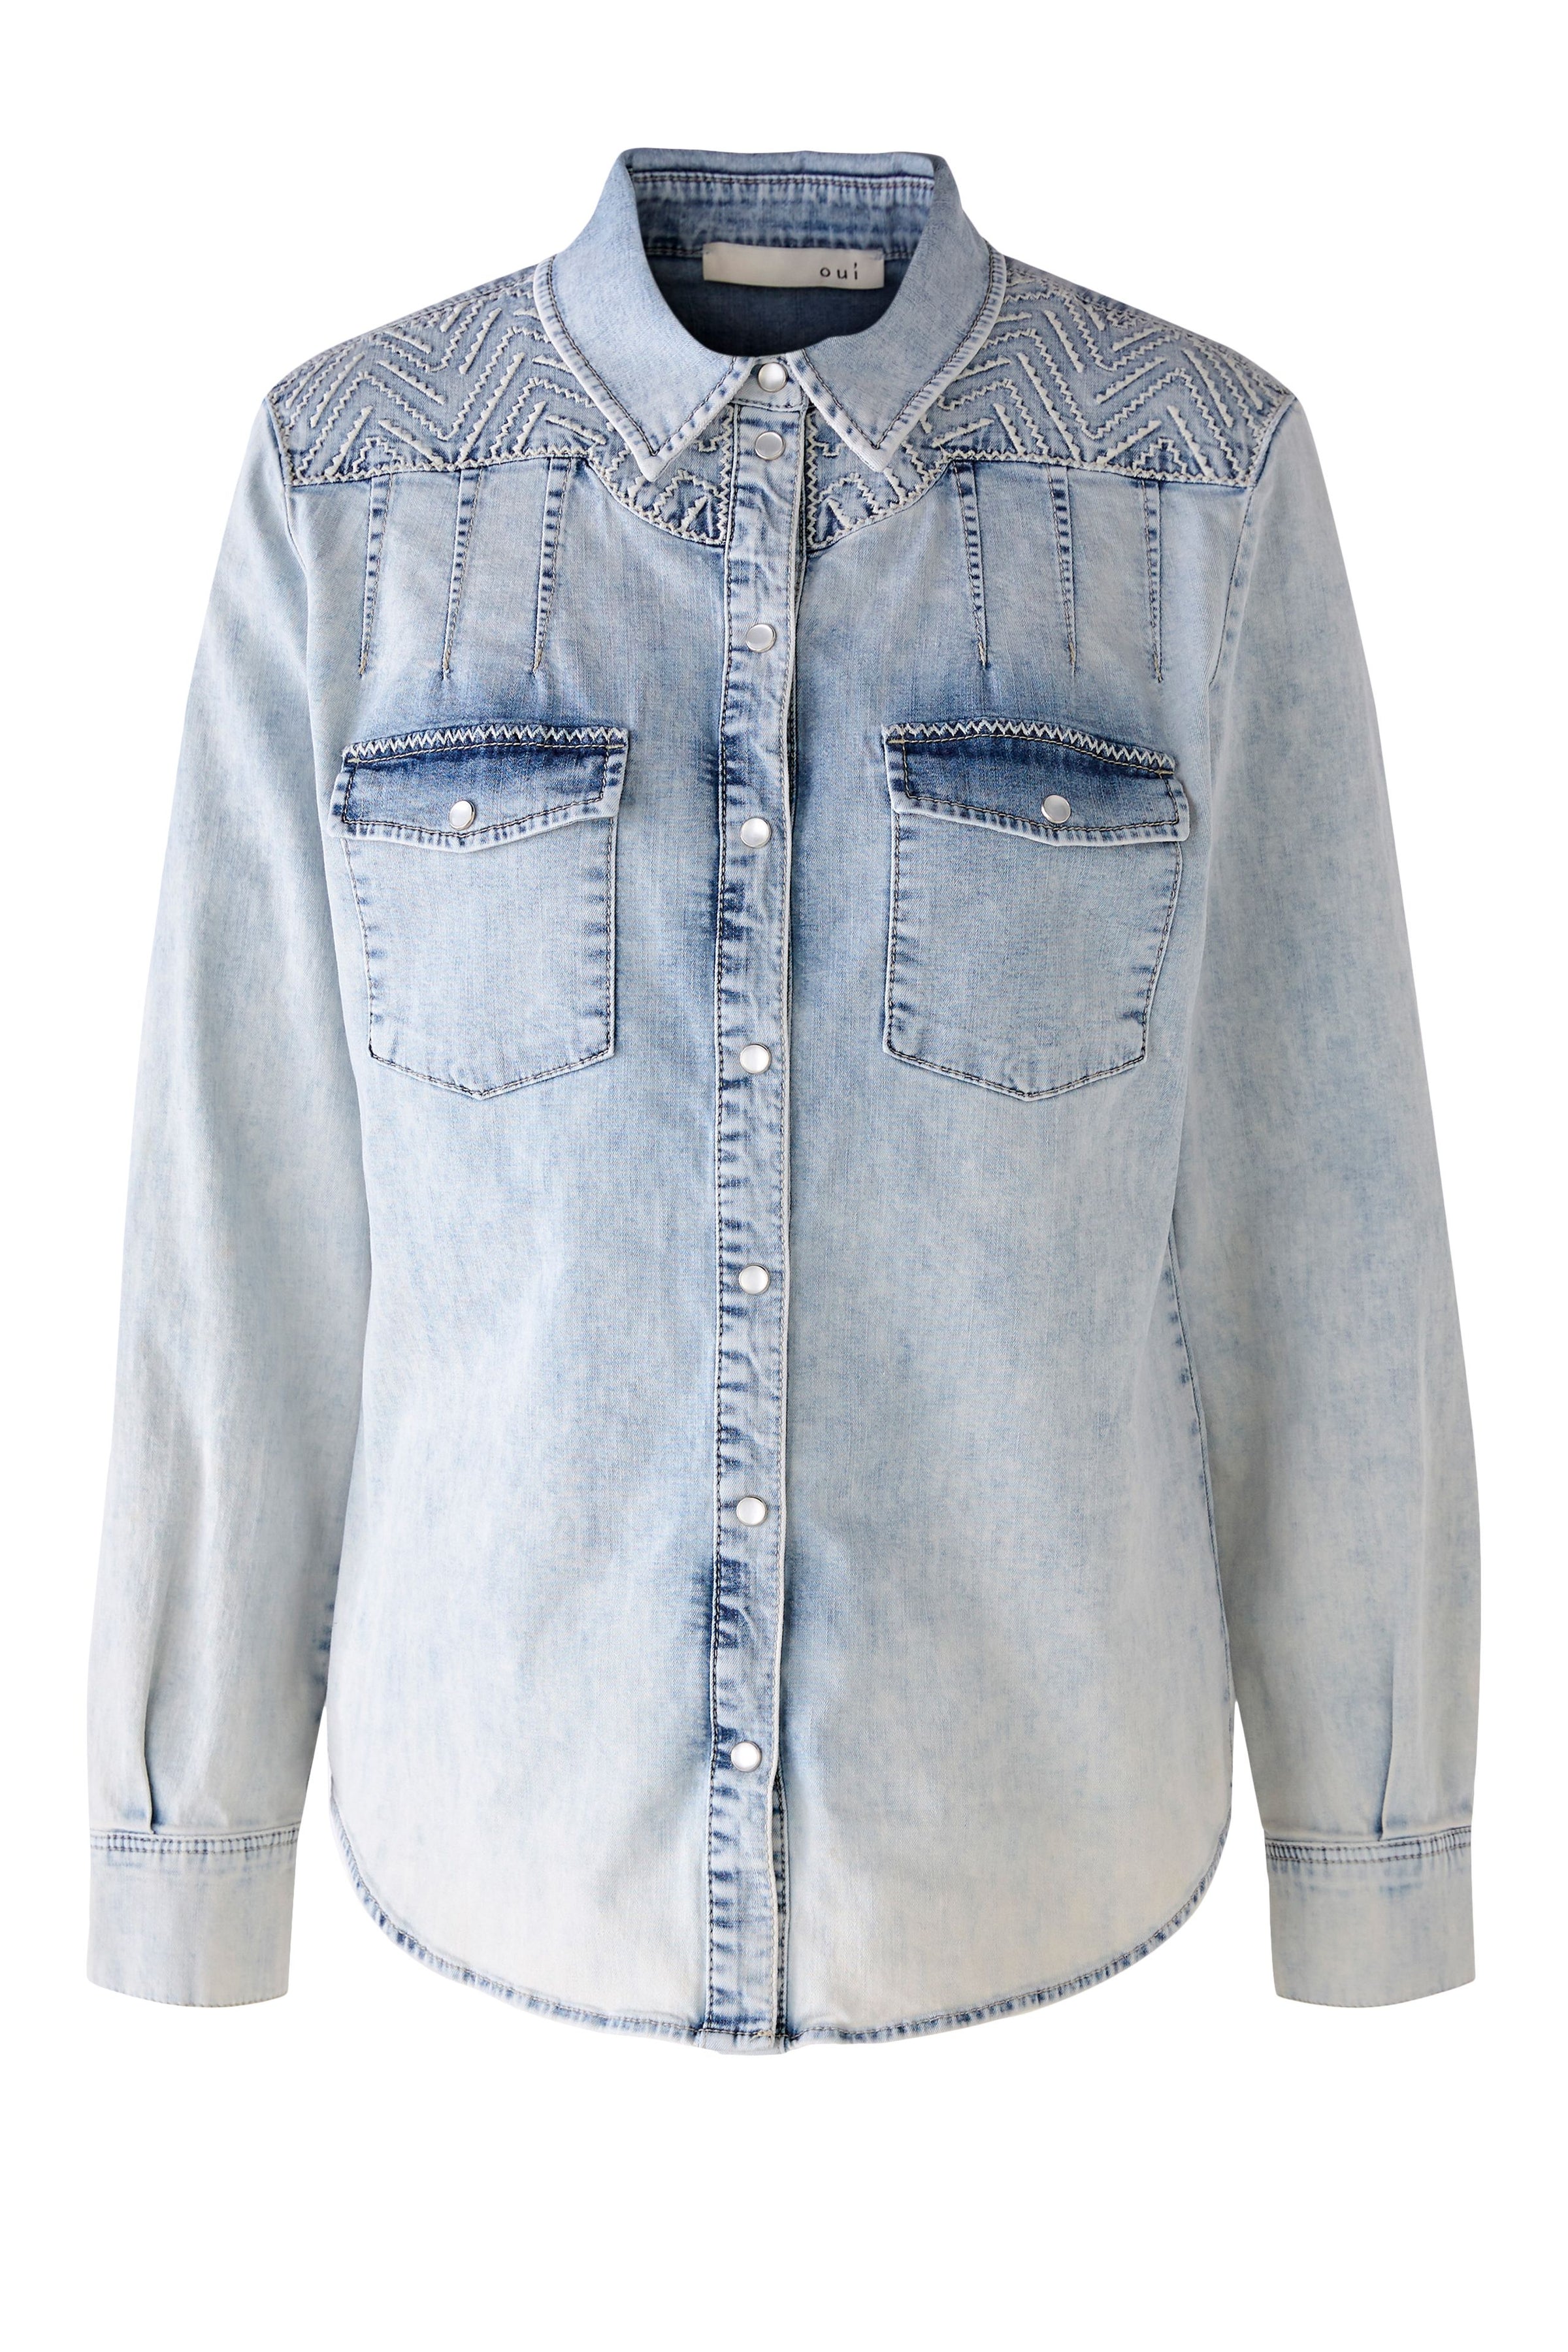 Oui Denim Jean Shirt With Long Sleeves